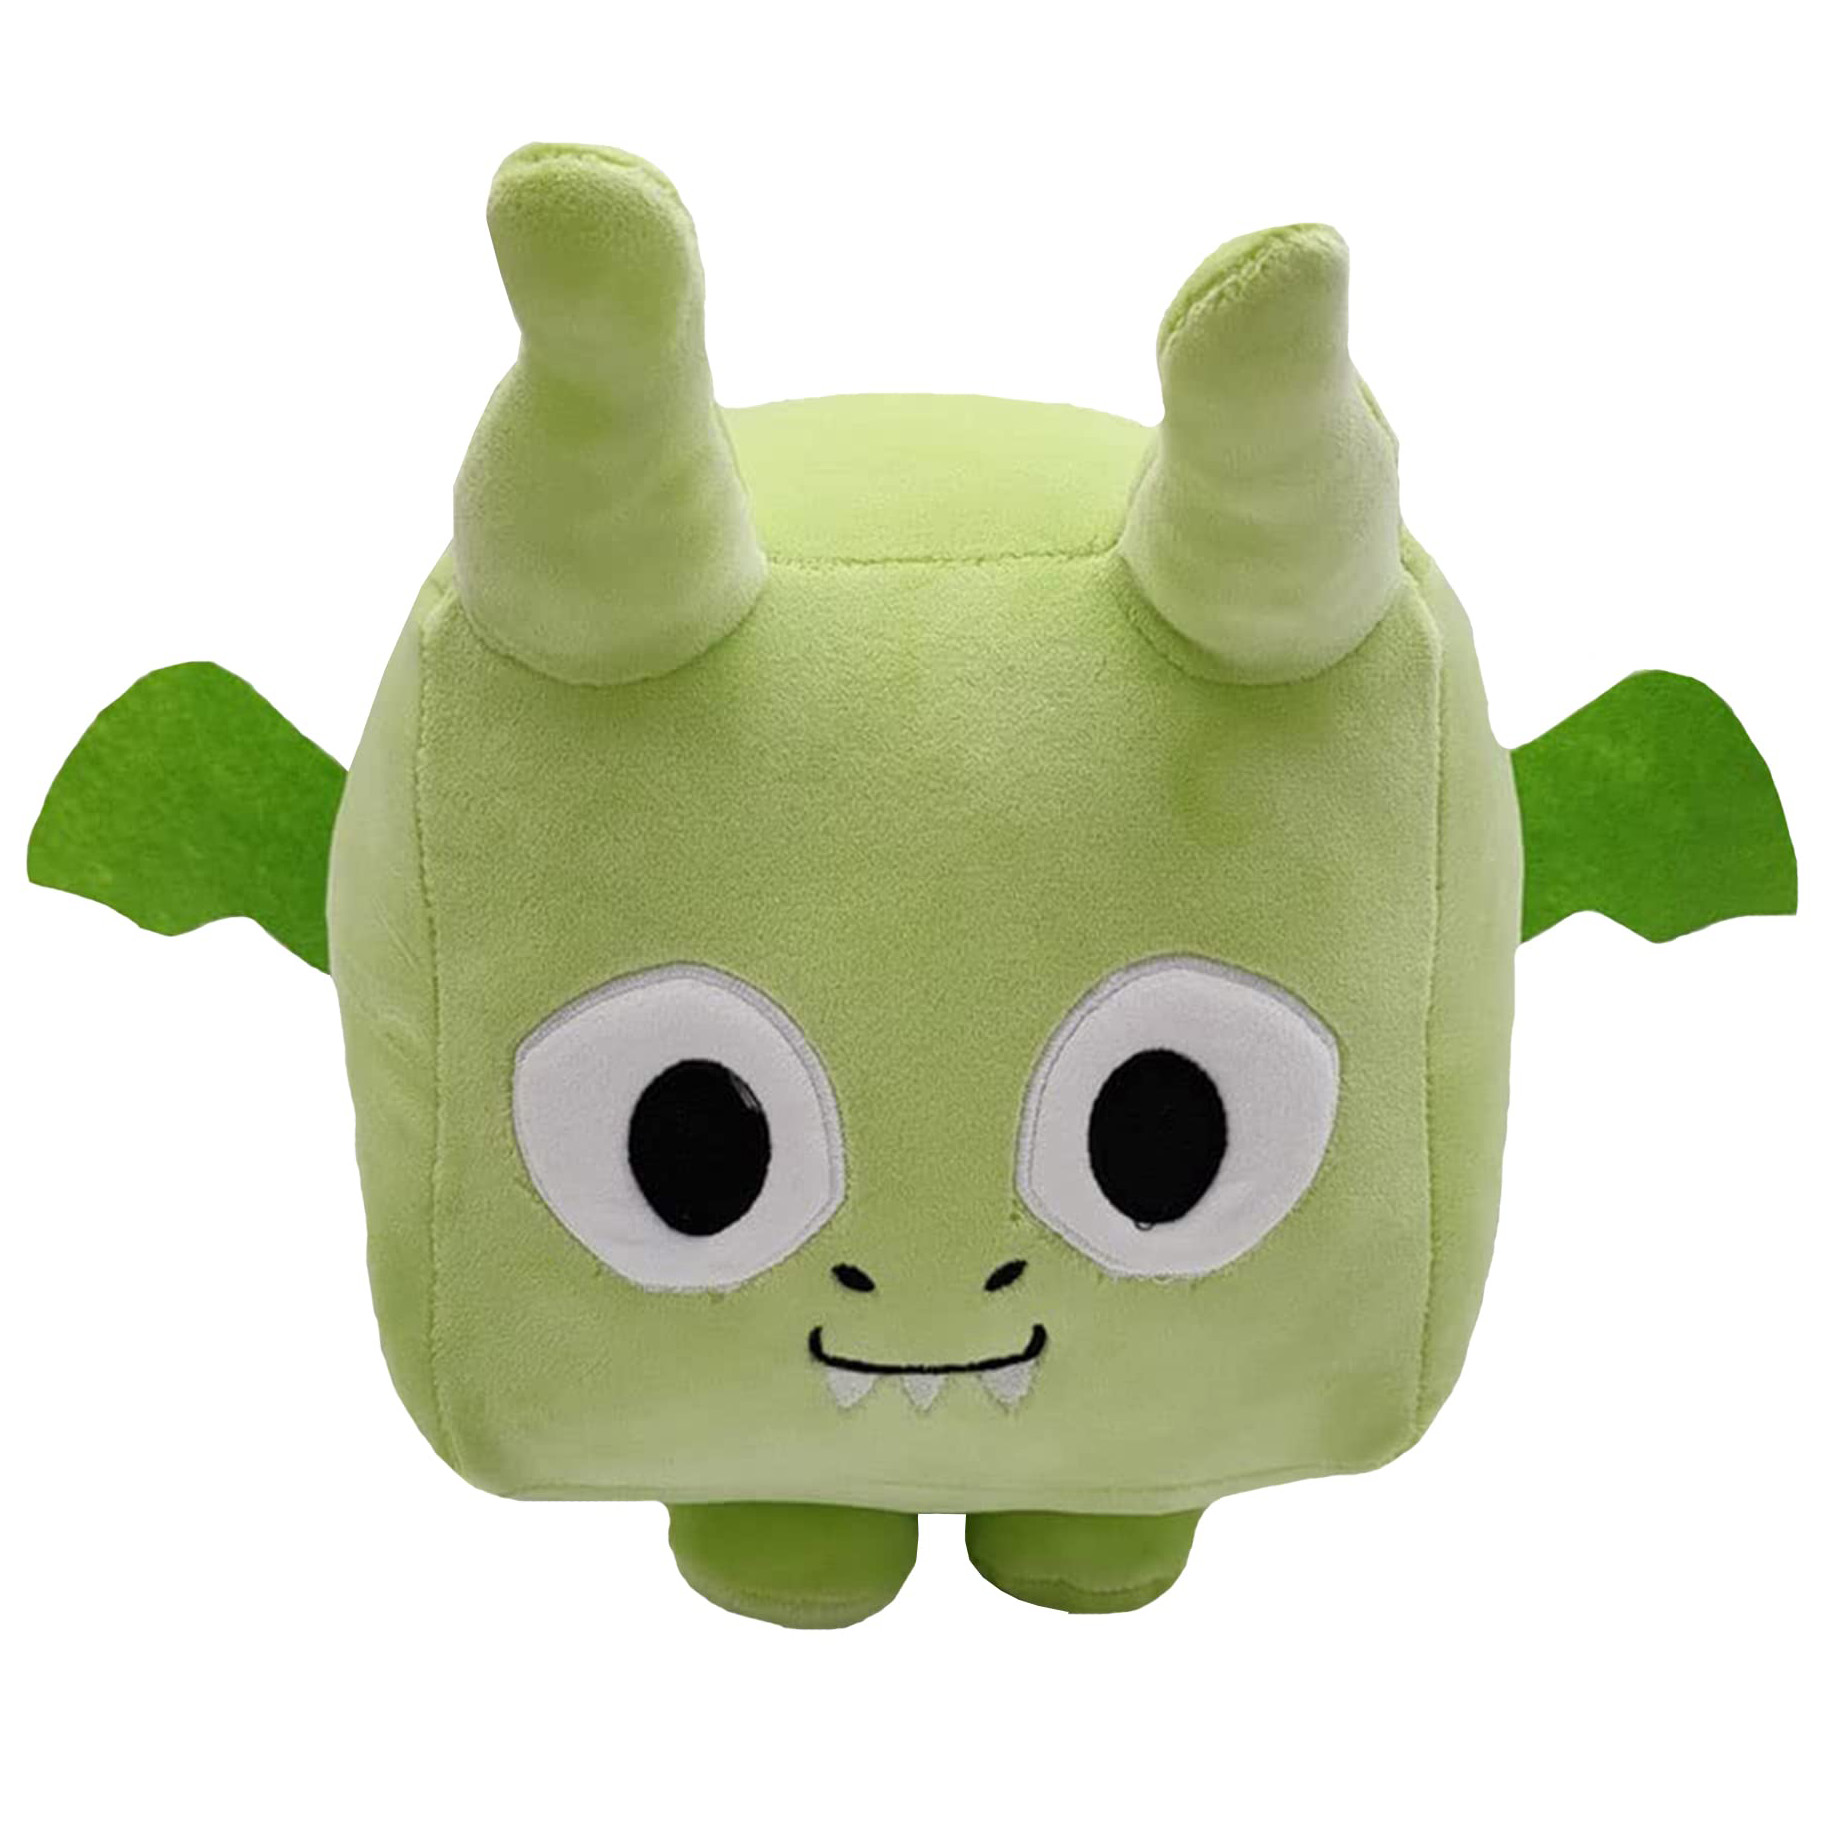 Green Dragon Stuffed Animal Kawaii Cute Soft Toy for Kids and Fans